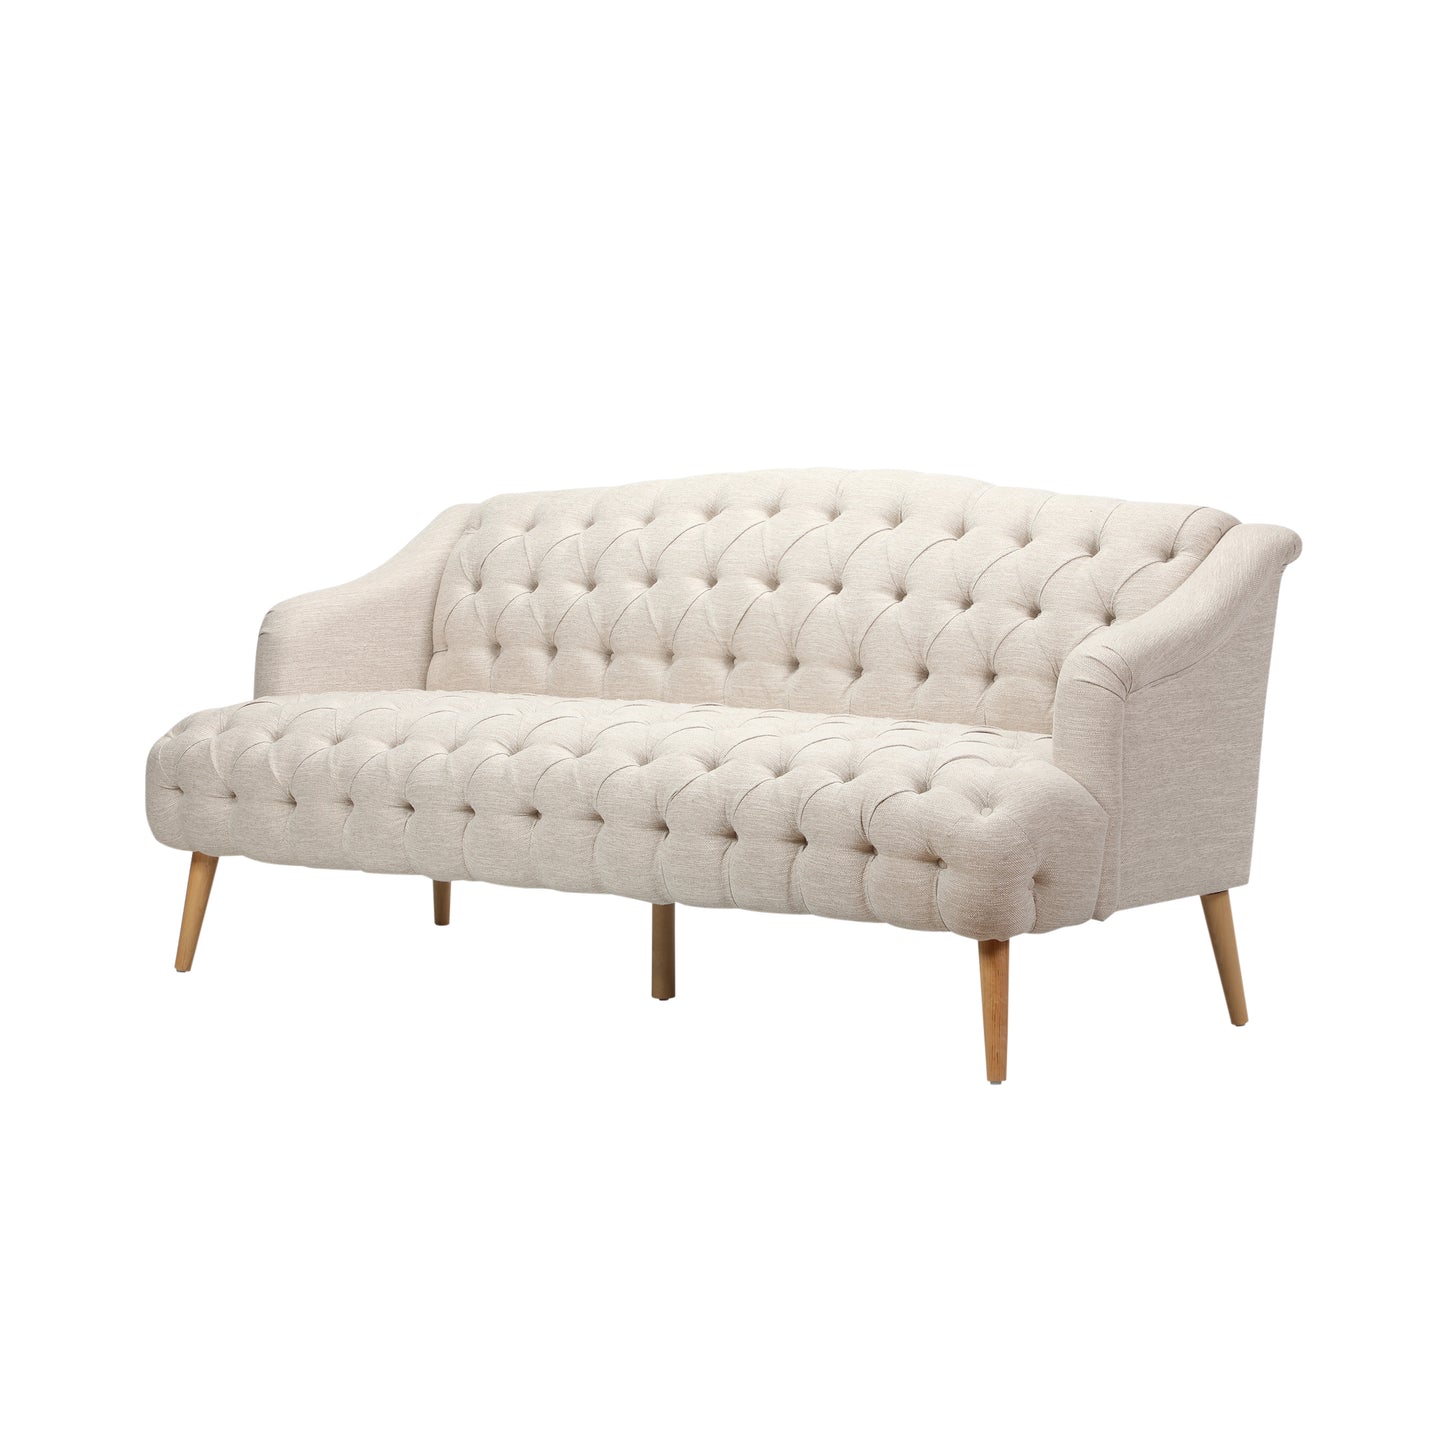 Kayleigh Contemporary Tufted Fabric 3 Seater Sofa